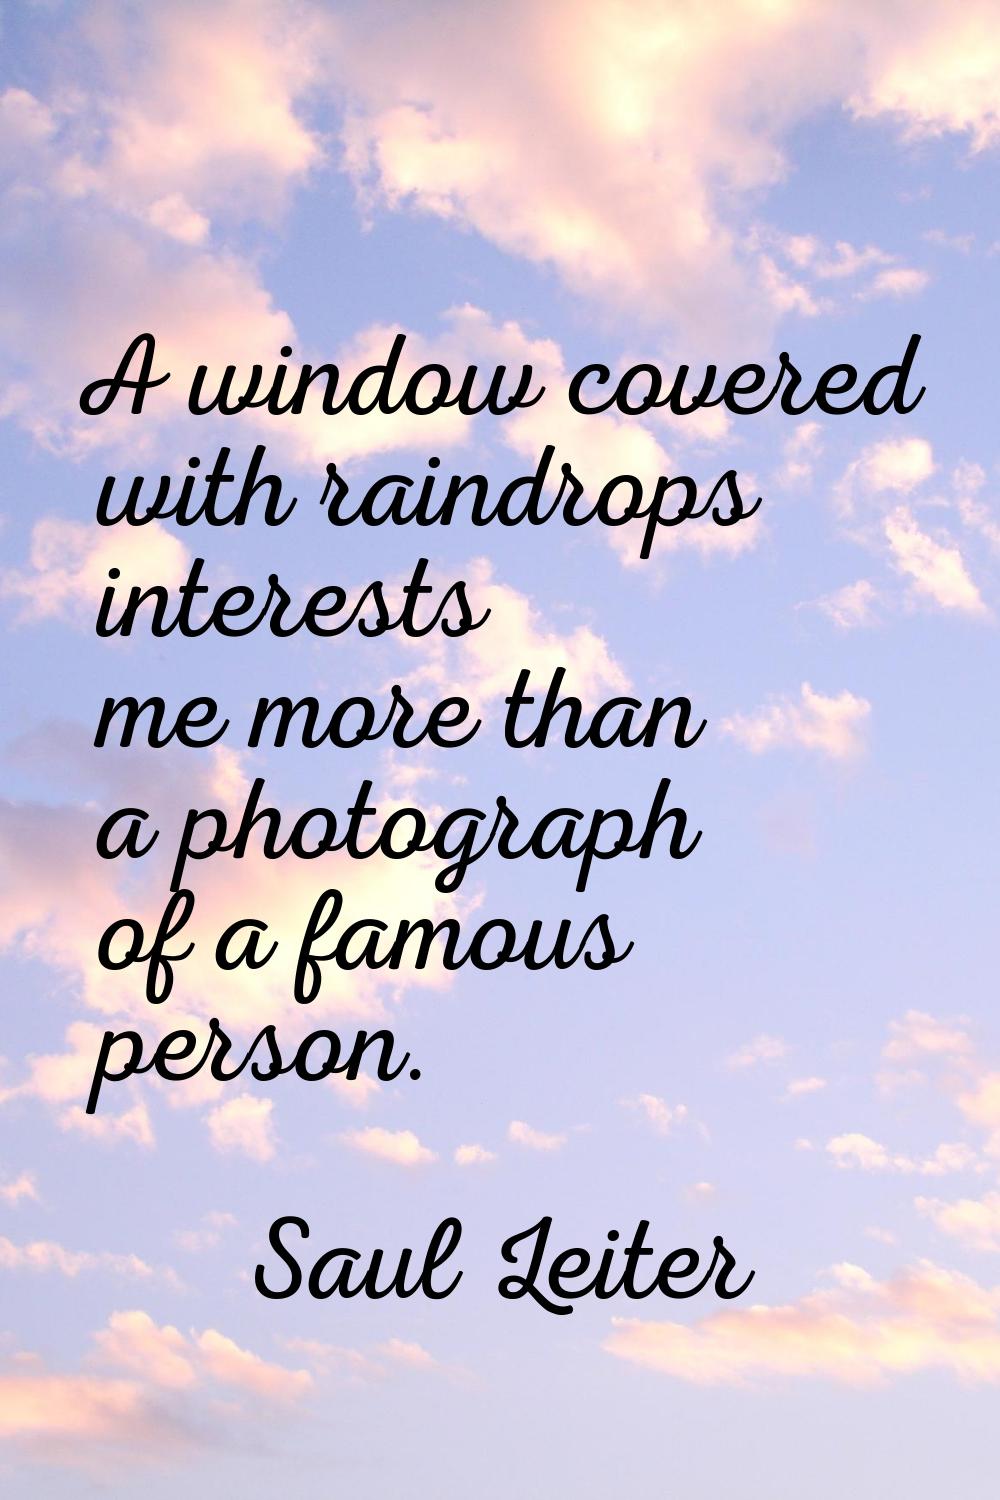 A window covered with raindrops interests me more than a photograph of a famous person.